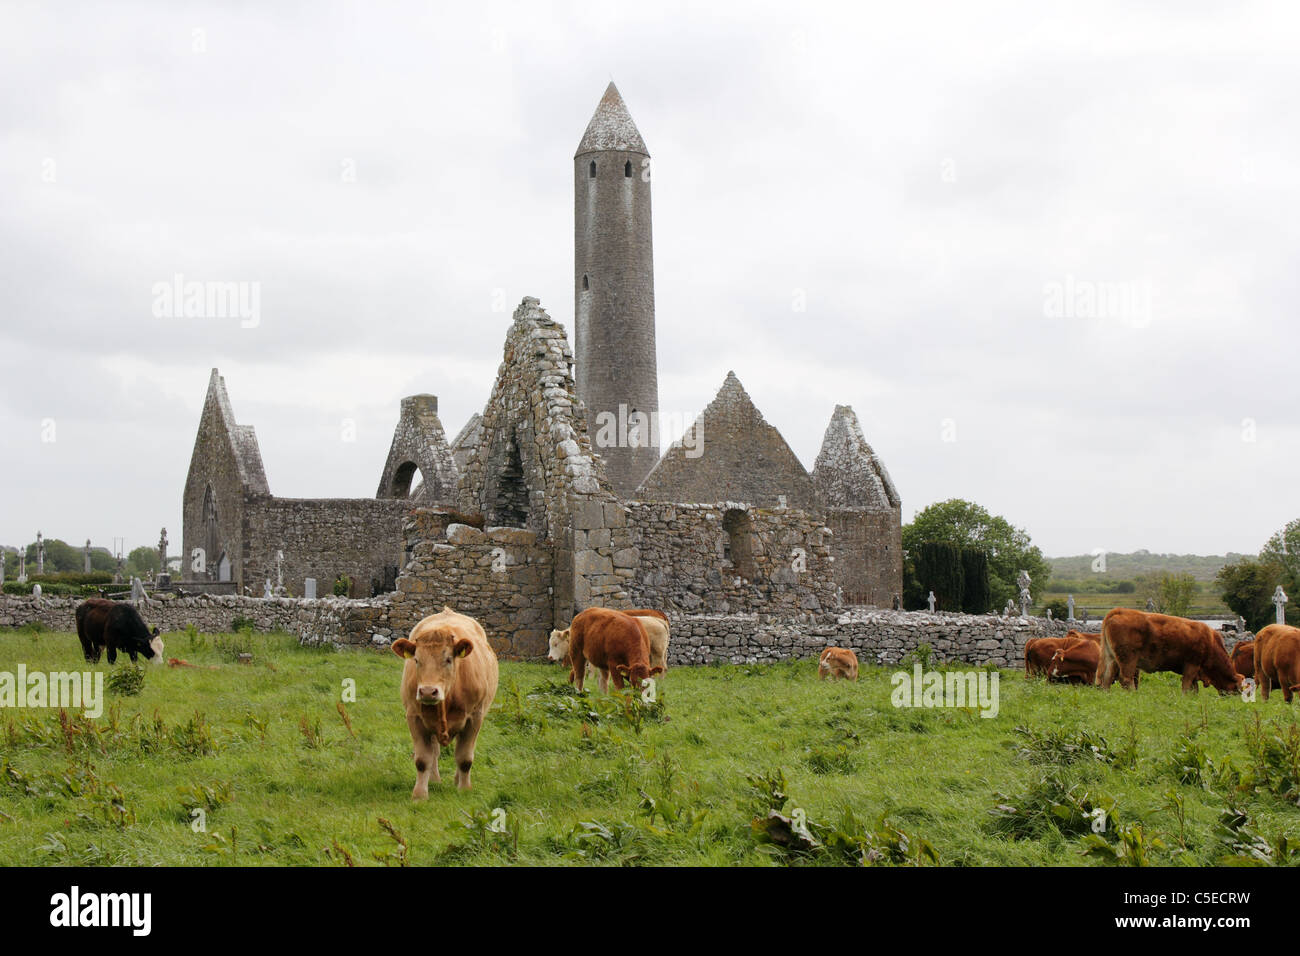 Kilmacduagh Monastery, County Galway, Ireland. At 34 metres (112 feet), the round tower is the tallest in Ireland. Stock Photo